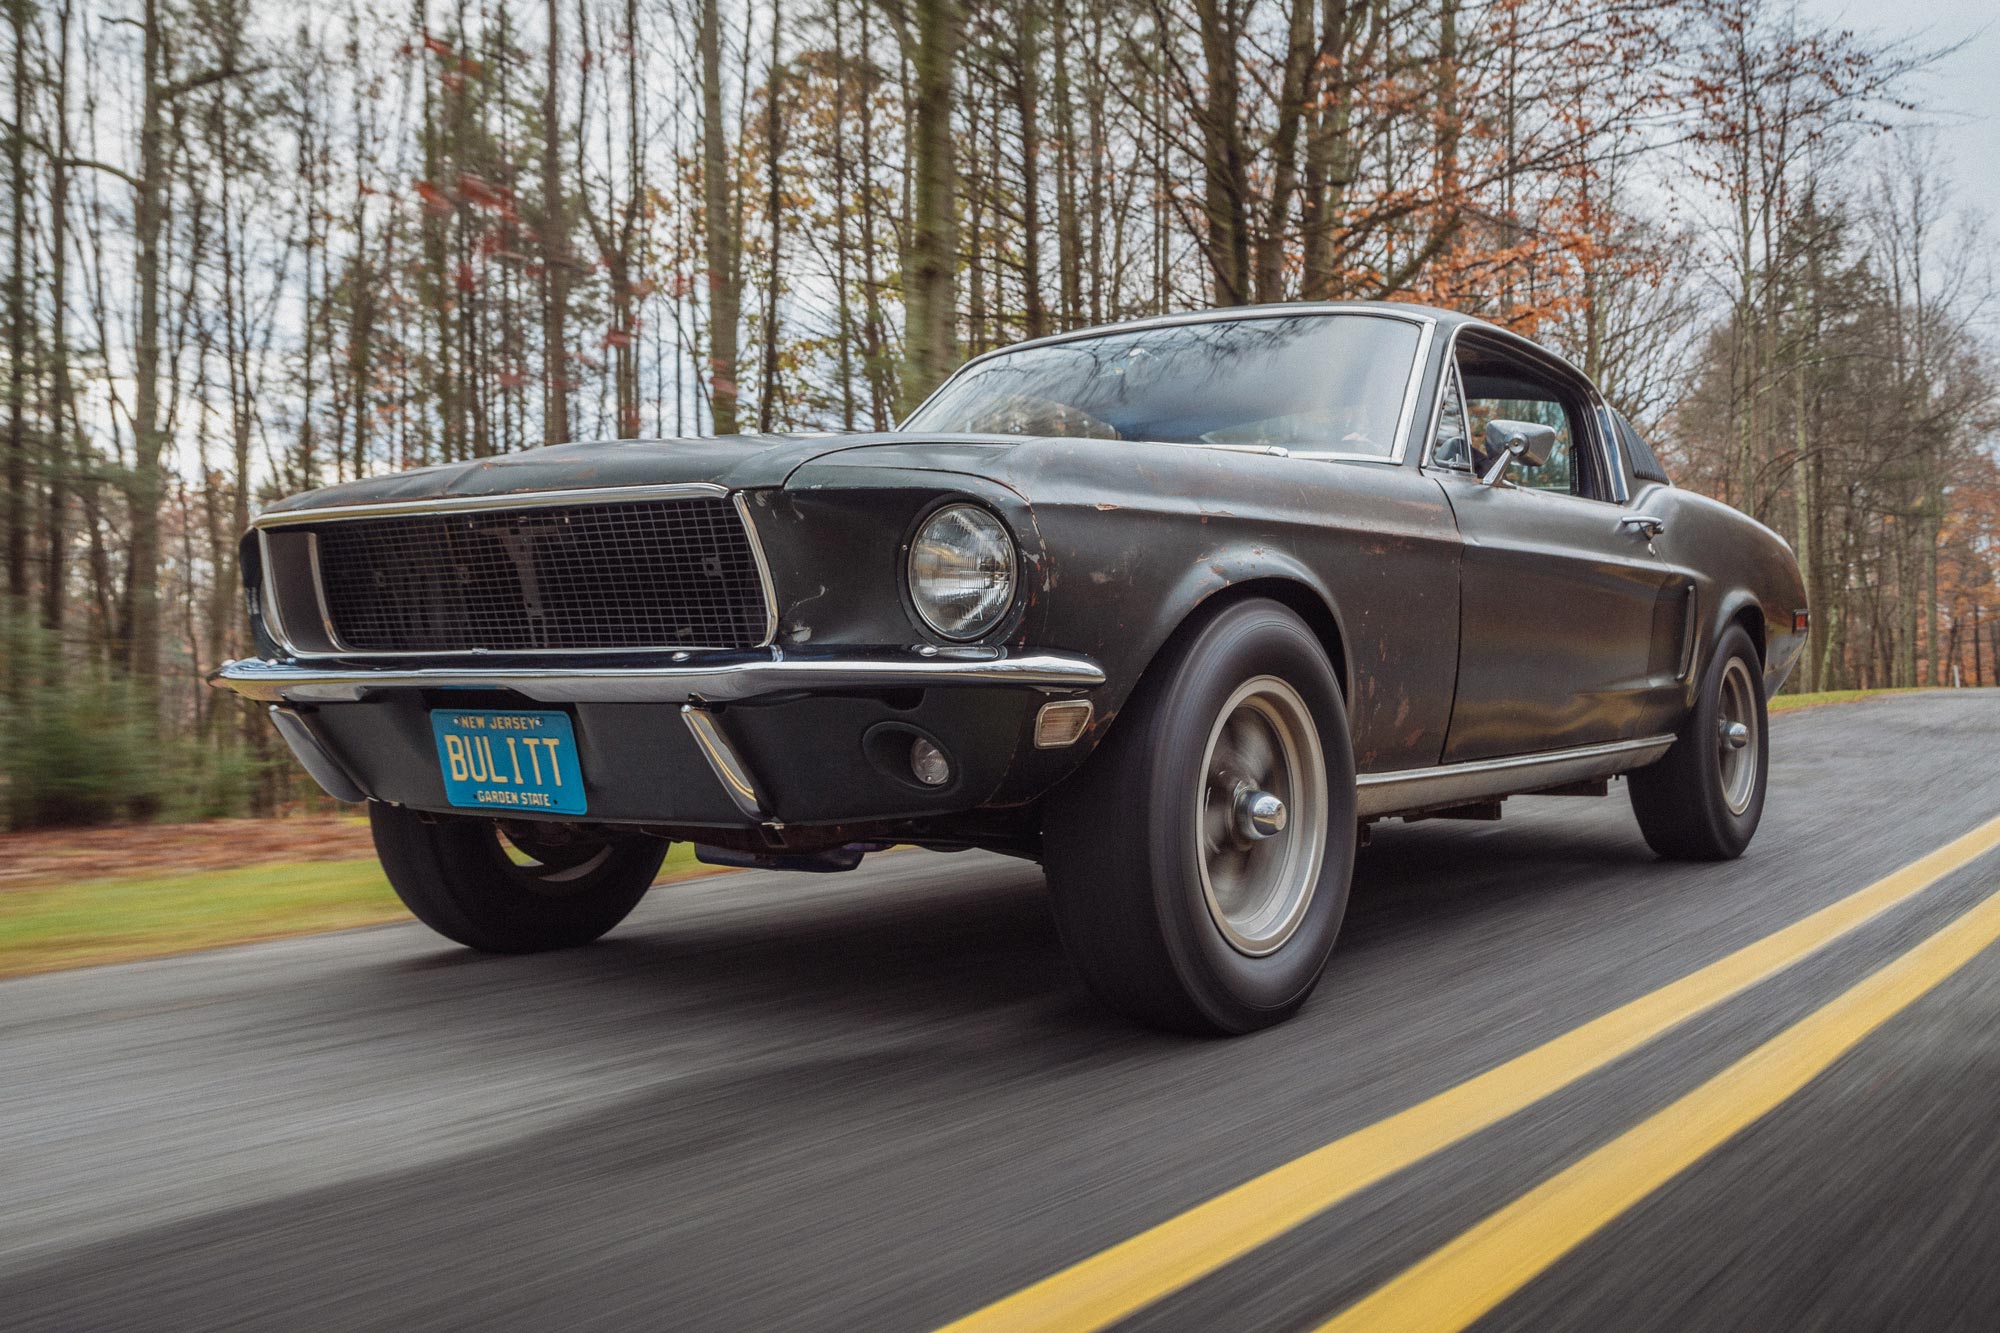 A green 1968 Ford Mustang from the movie Bullitt